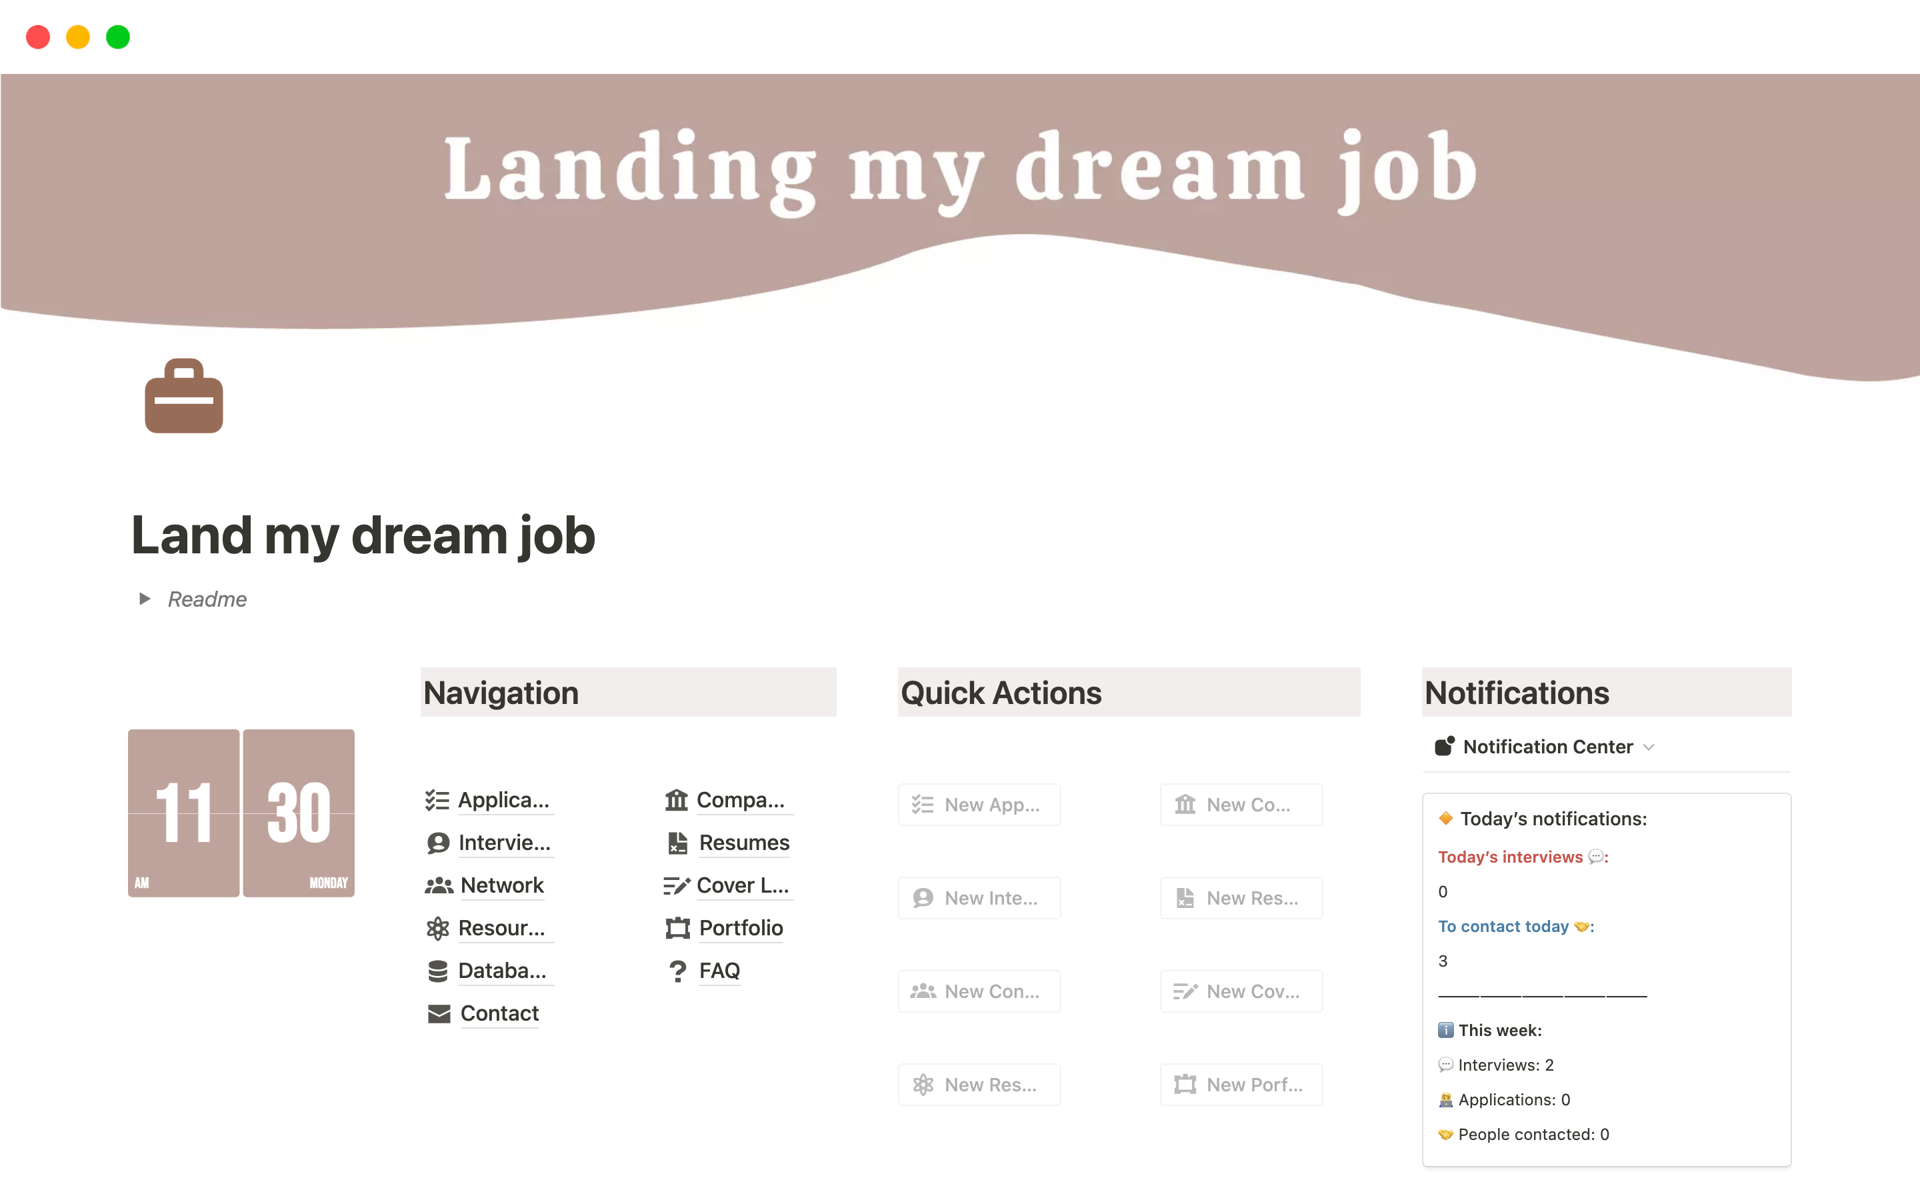 All-in-One tool to manage your job search from a single place. Streamline your efforts, stay organized, and increase your chances of landing your dream job.